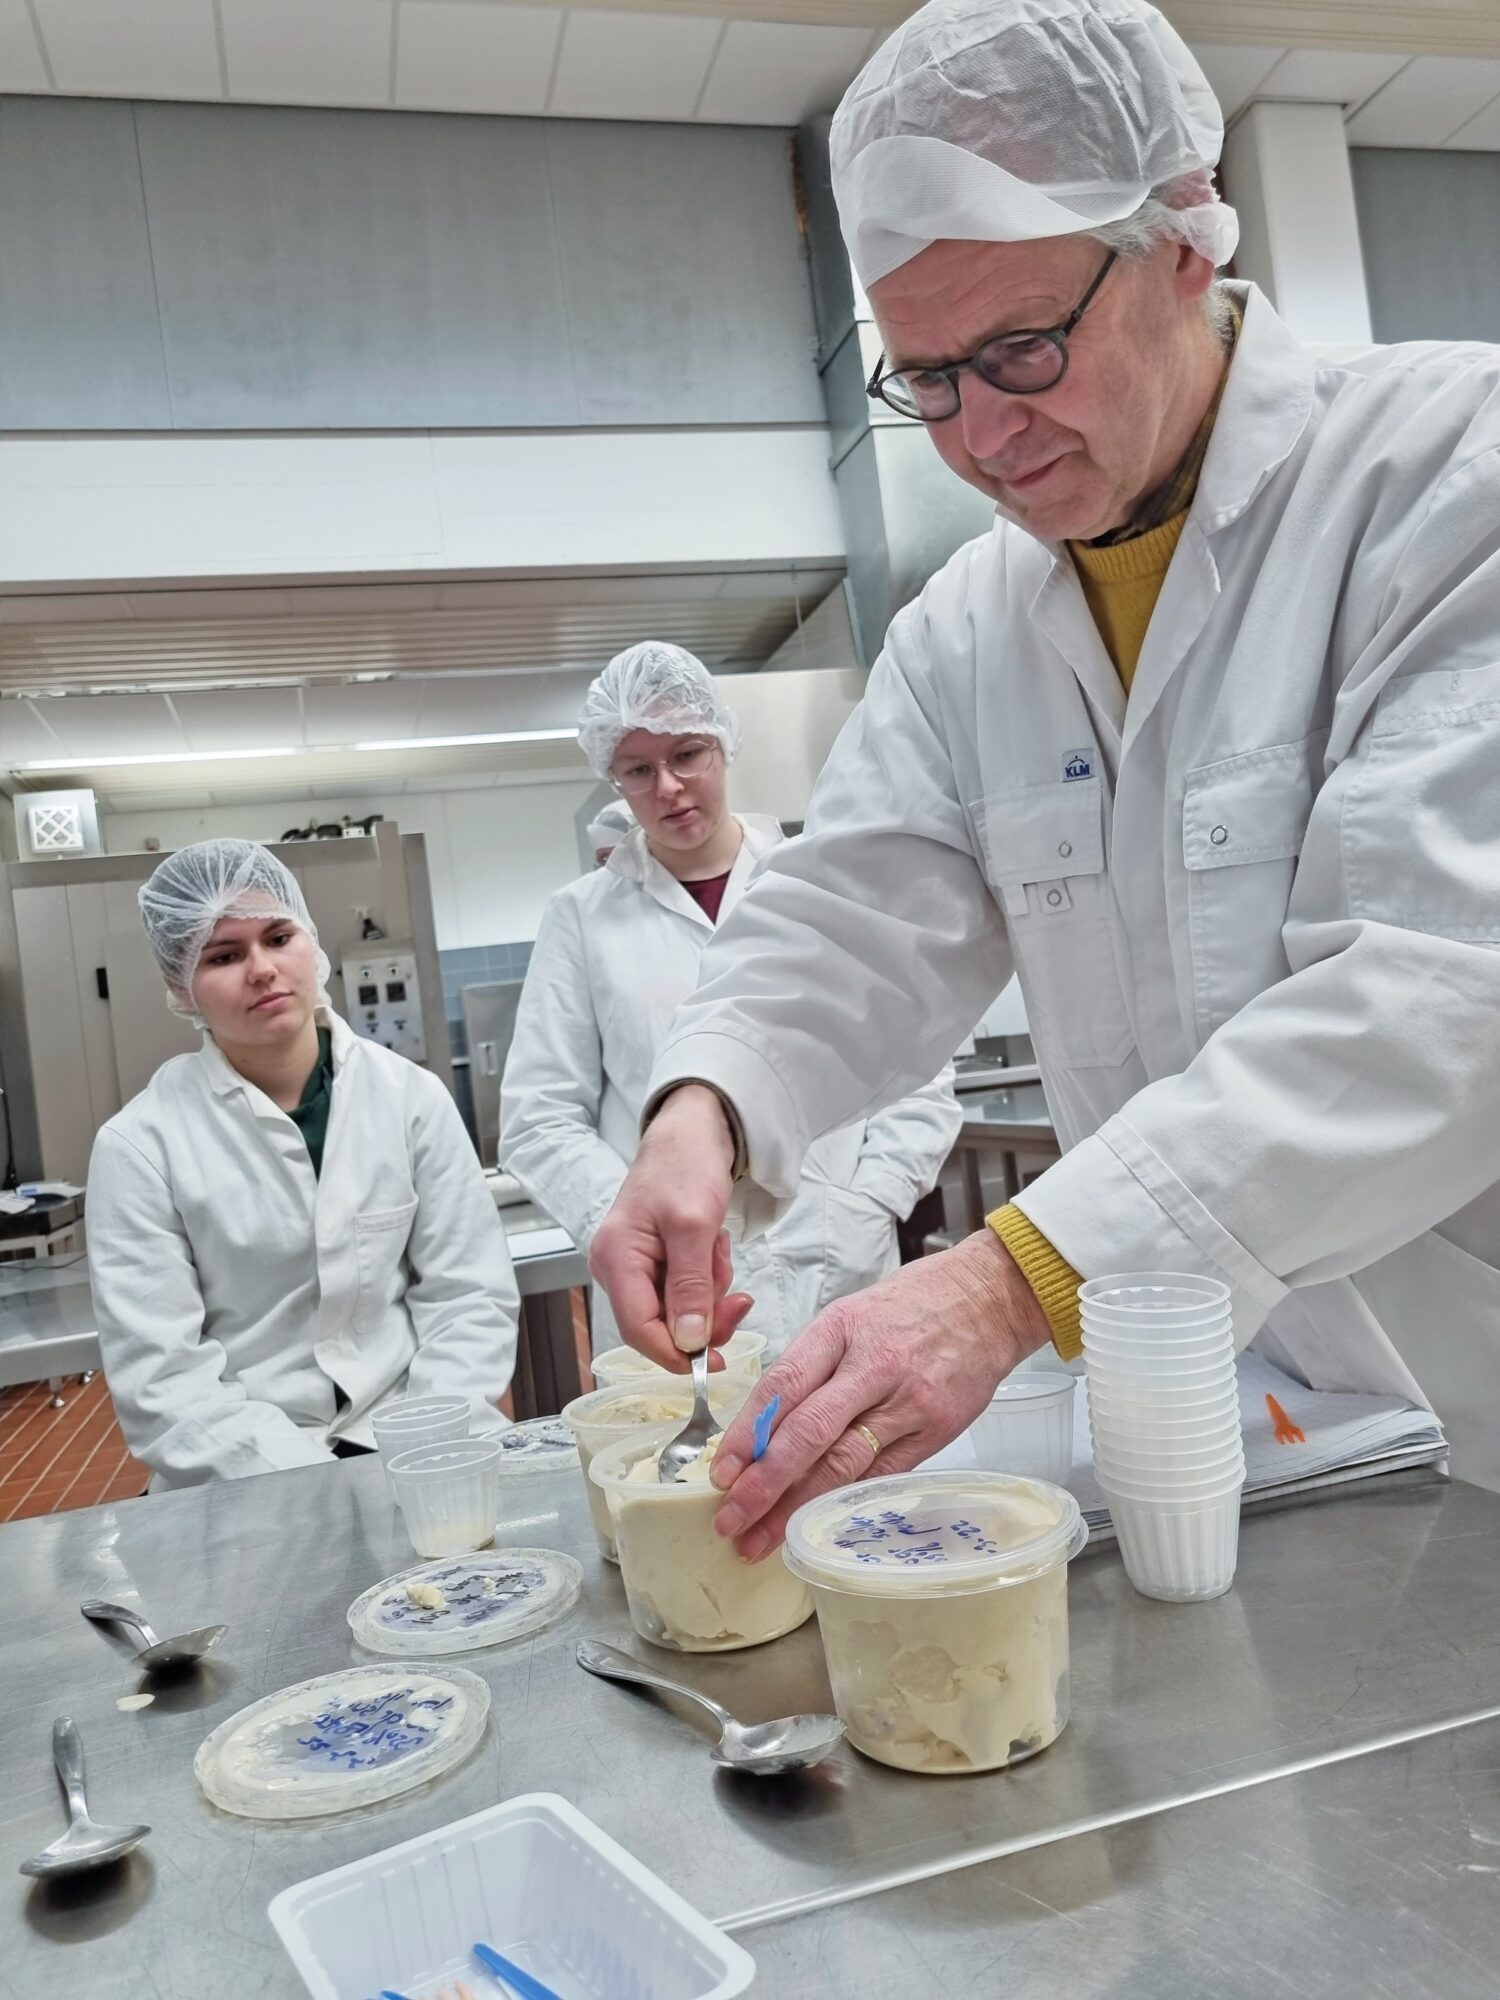 3 people in lab coats working on bread paste